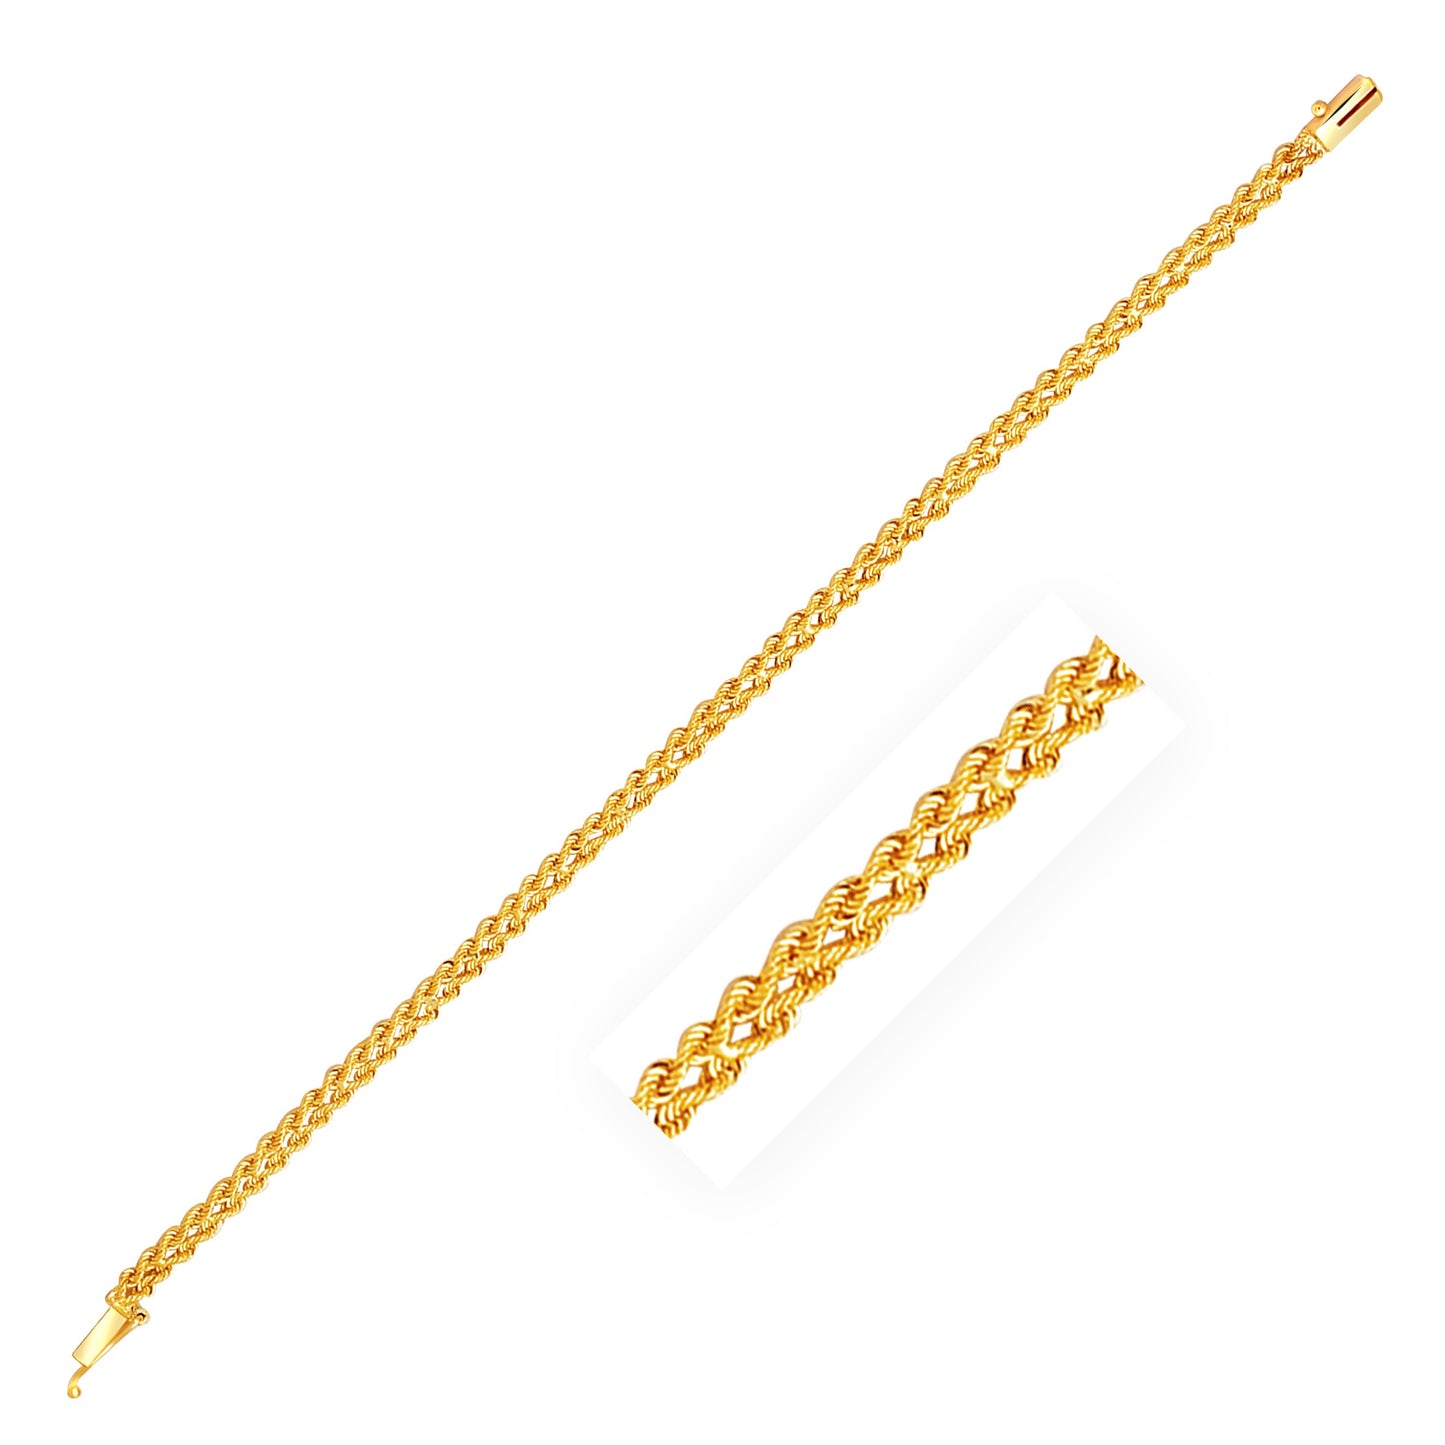 4.0 mm 14k Yellow Gold Two Row Rope Bracelet